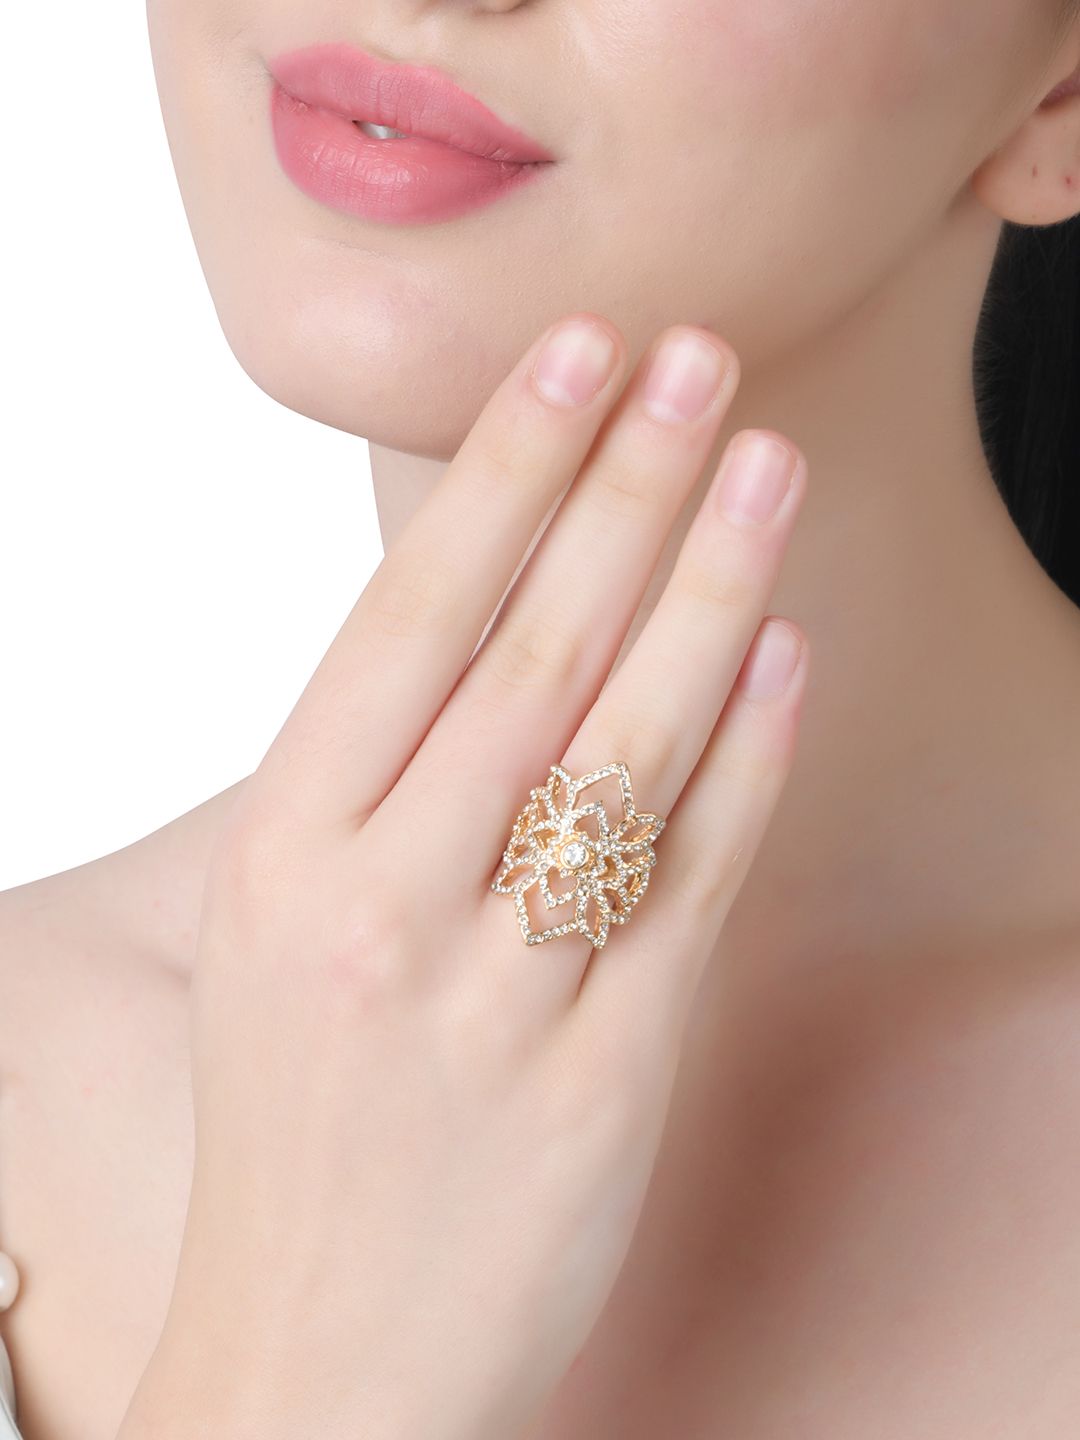 Lilly & sparkle Set of 2 Gold-Plated Crystal-Studded Finger Rings Price in India